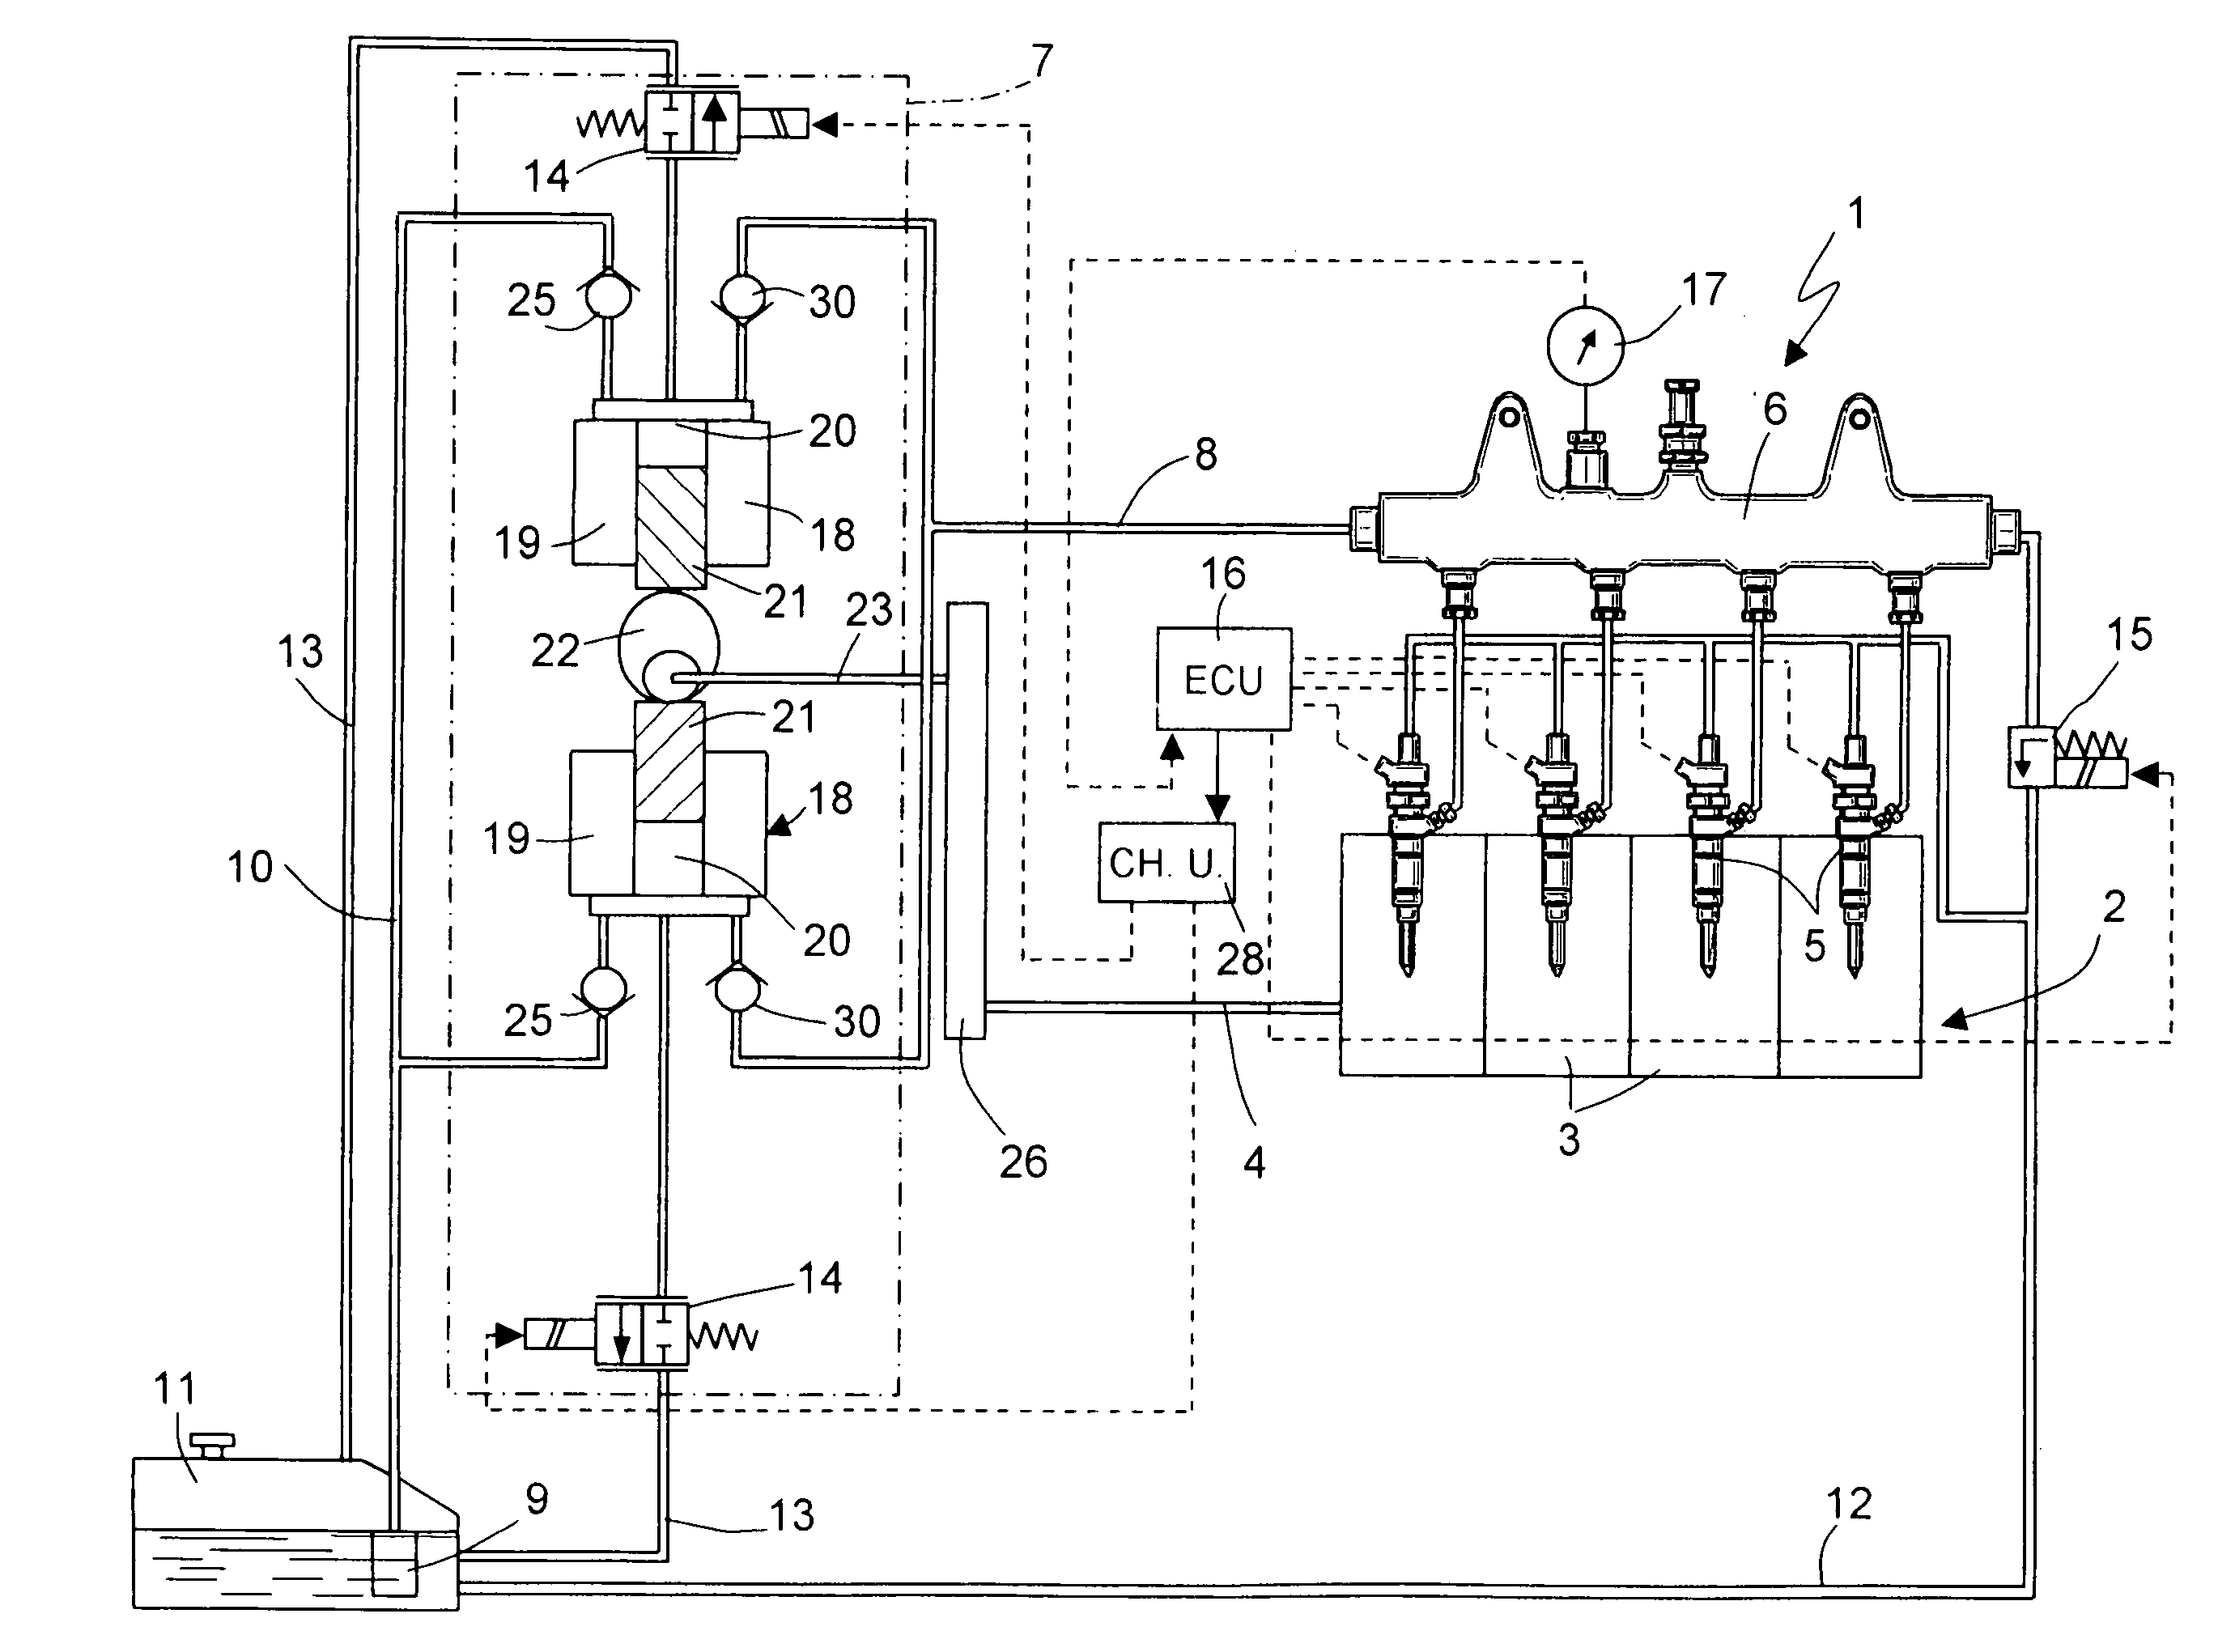 Storage-volume fuel injection system for an internal combustion engine